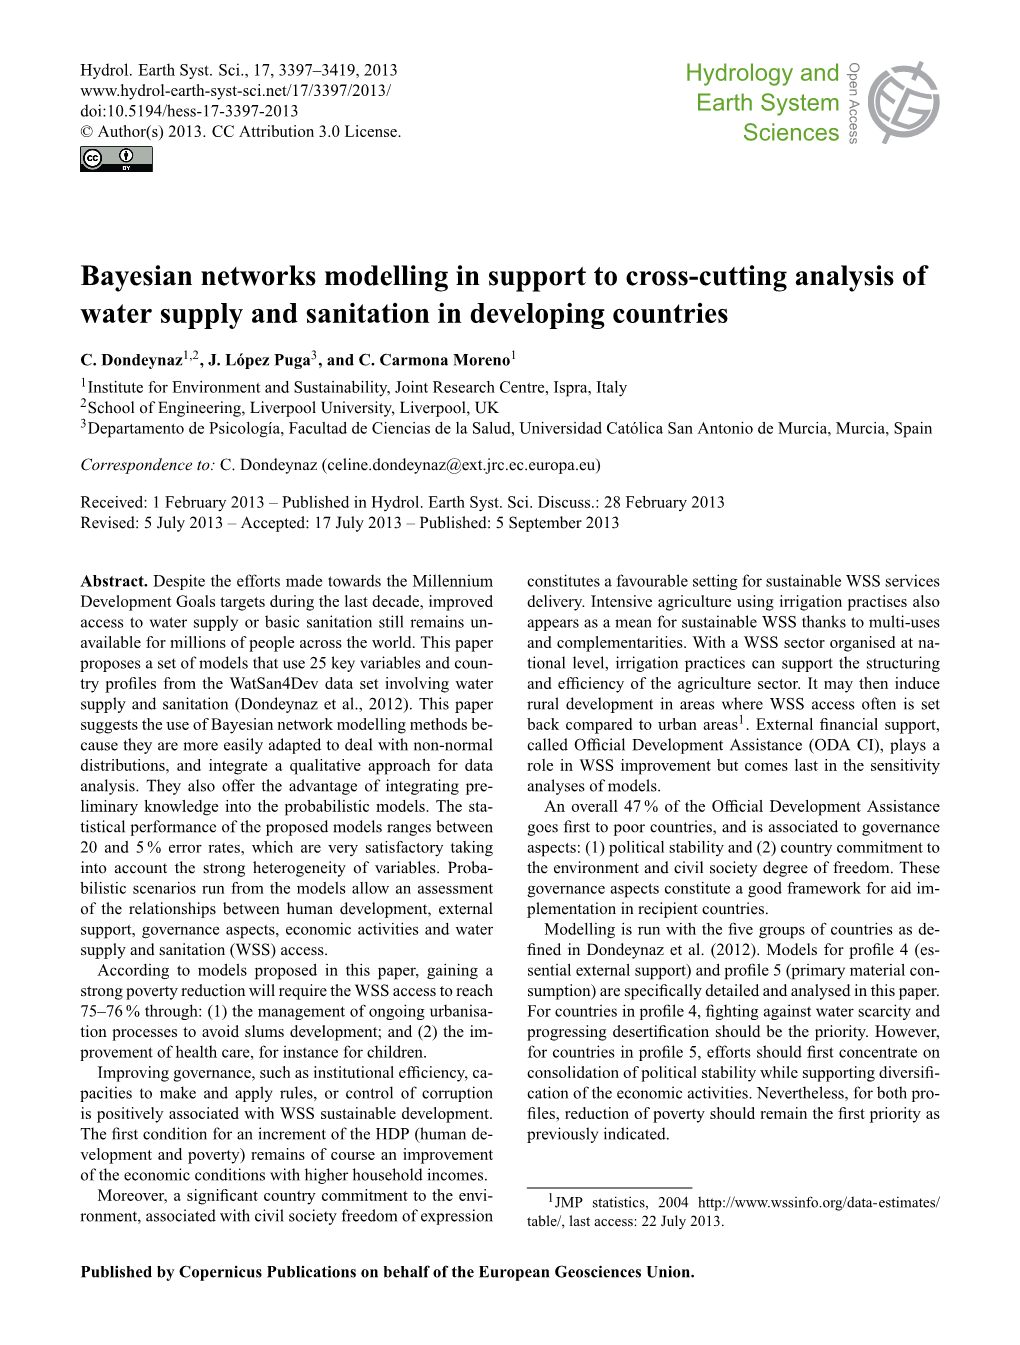 Bayesian Networks Modelling in Support to Cross-Cutting Analysis Of